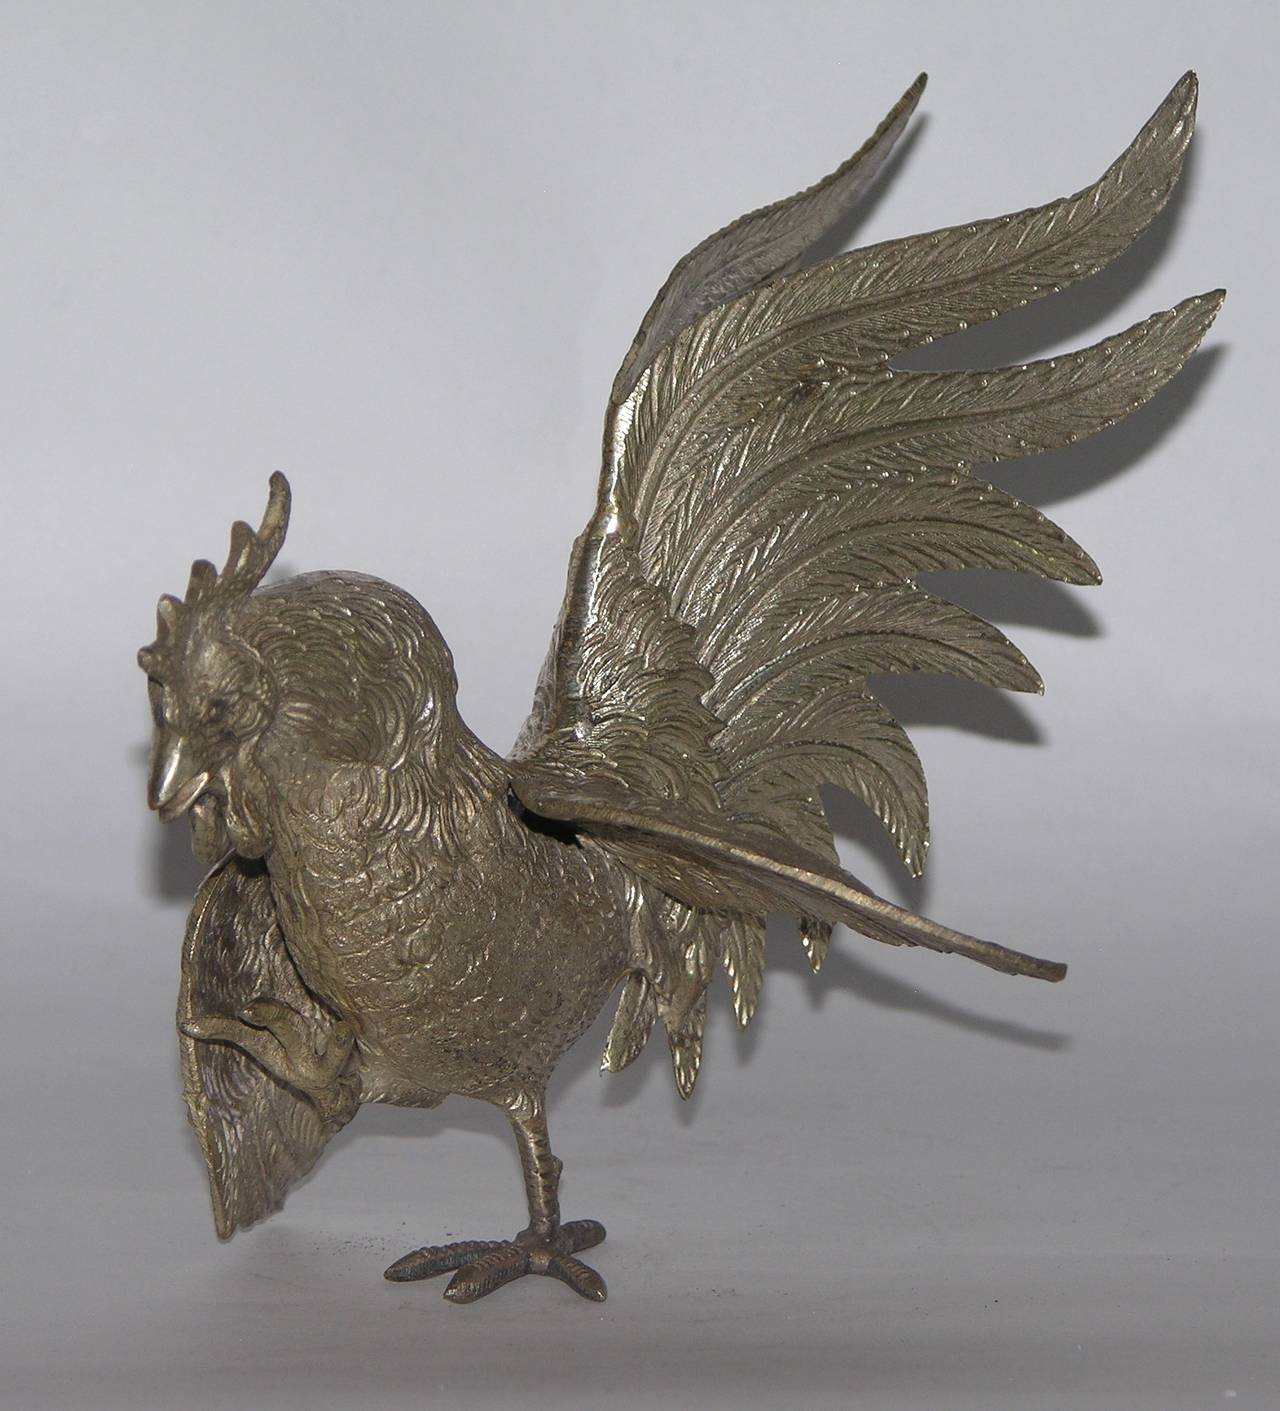 A fun animal sculpture in the shape of a bird: Rooster in walking posture by Gucci, Italy, nicely detailed with chased feathers.